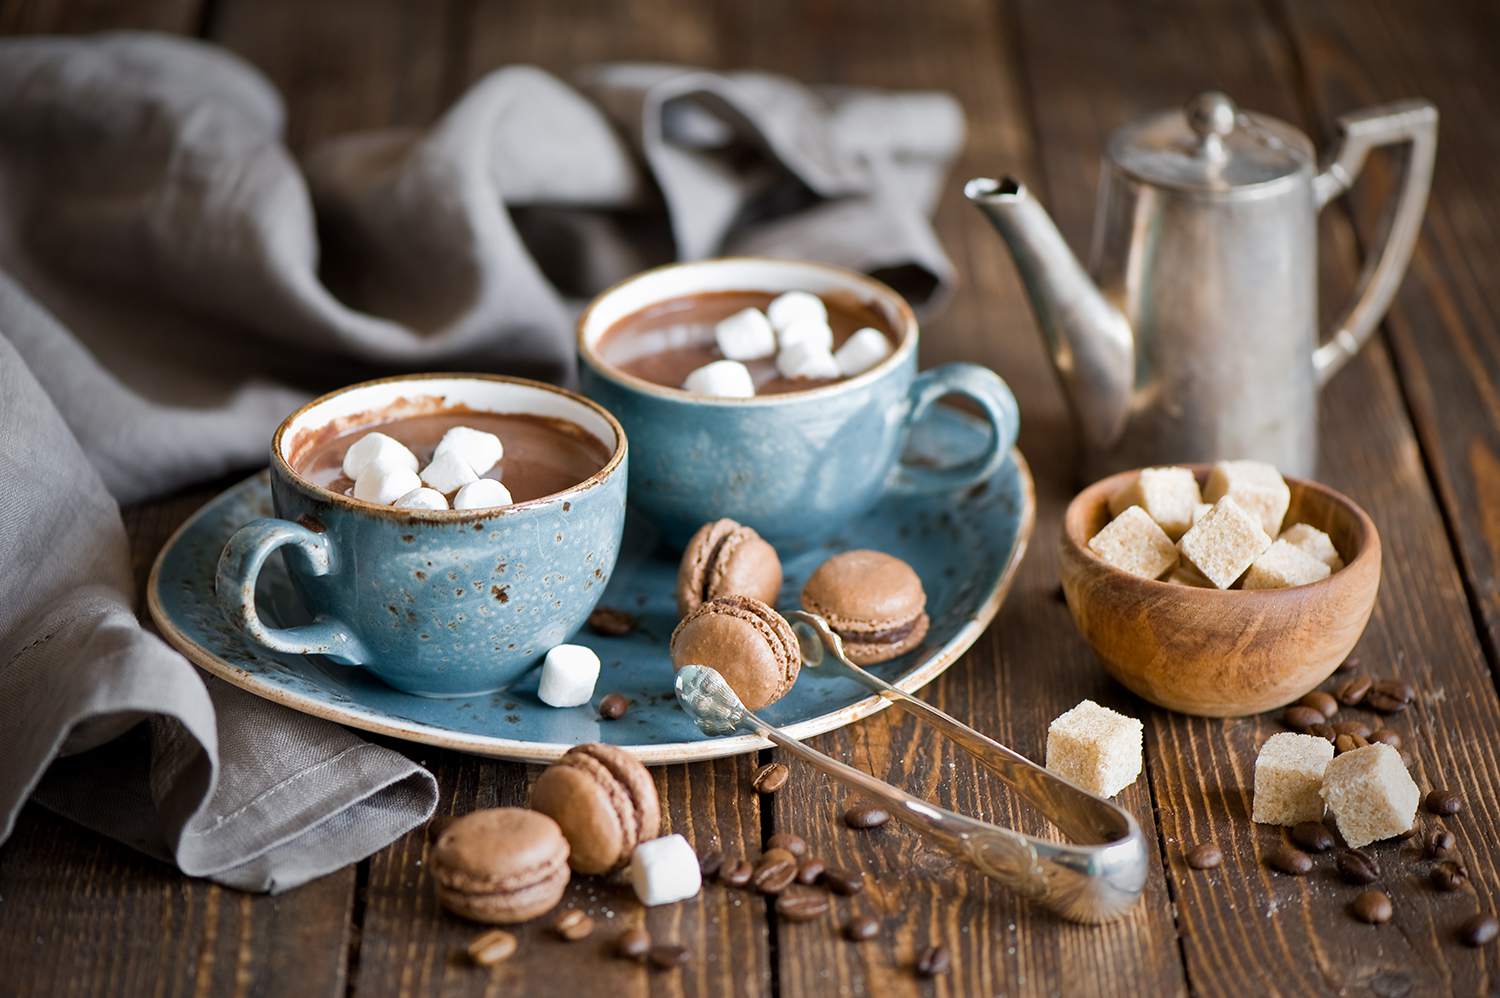 🍪 Only a True Chocoholic Will Have Eaten at Least 13/25 of These Treats Hot Chocolate